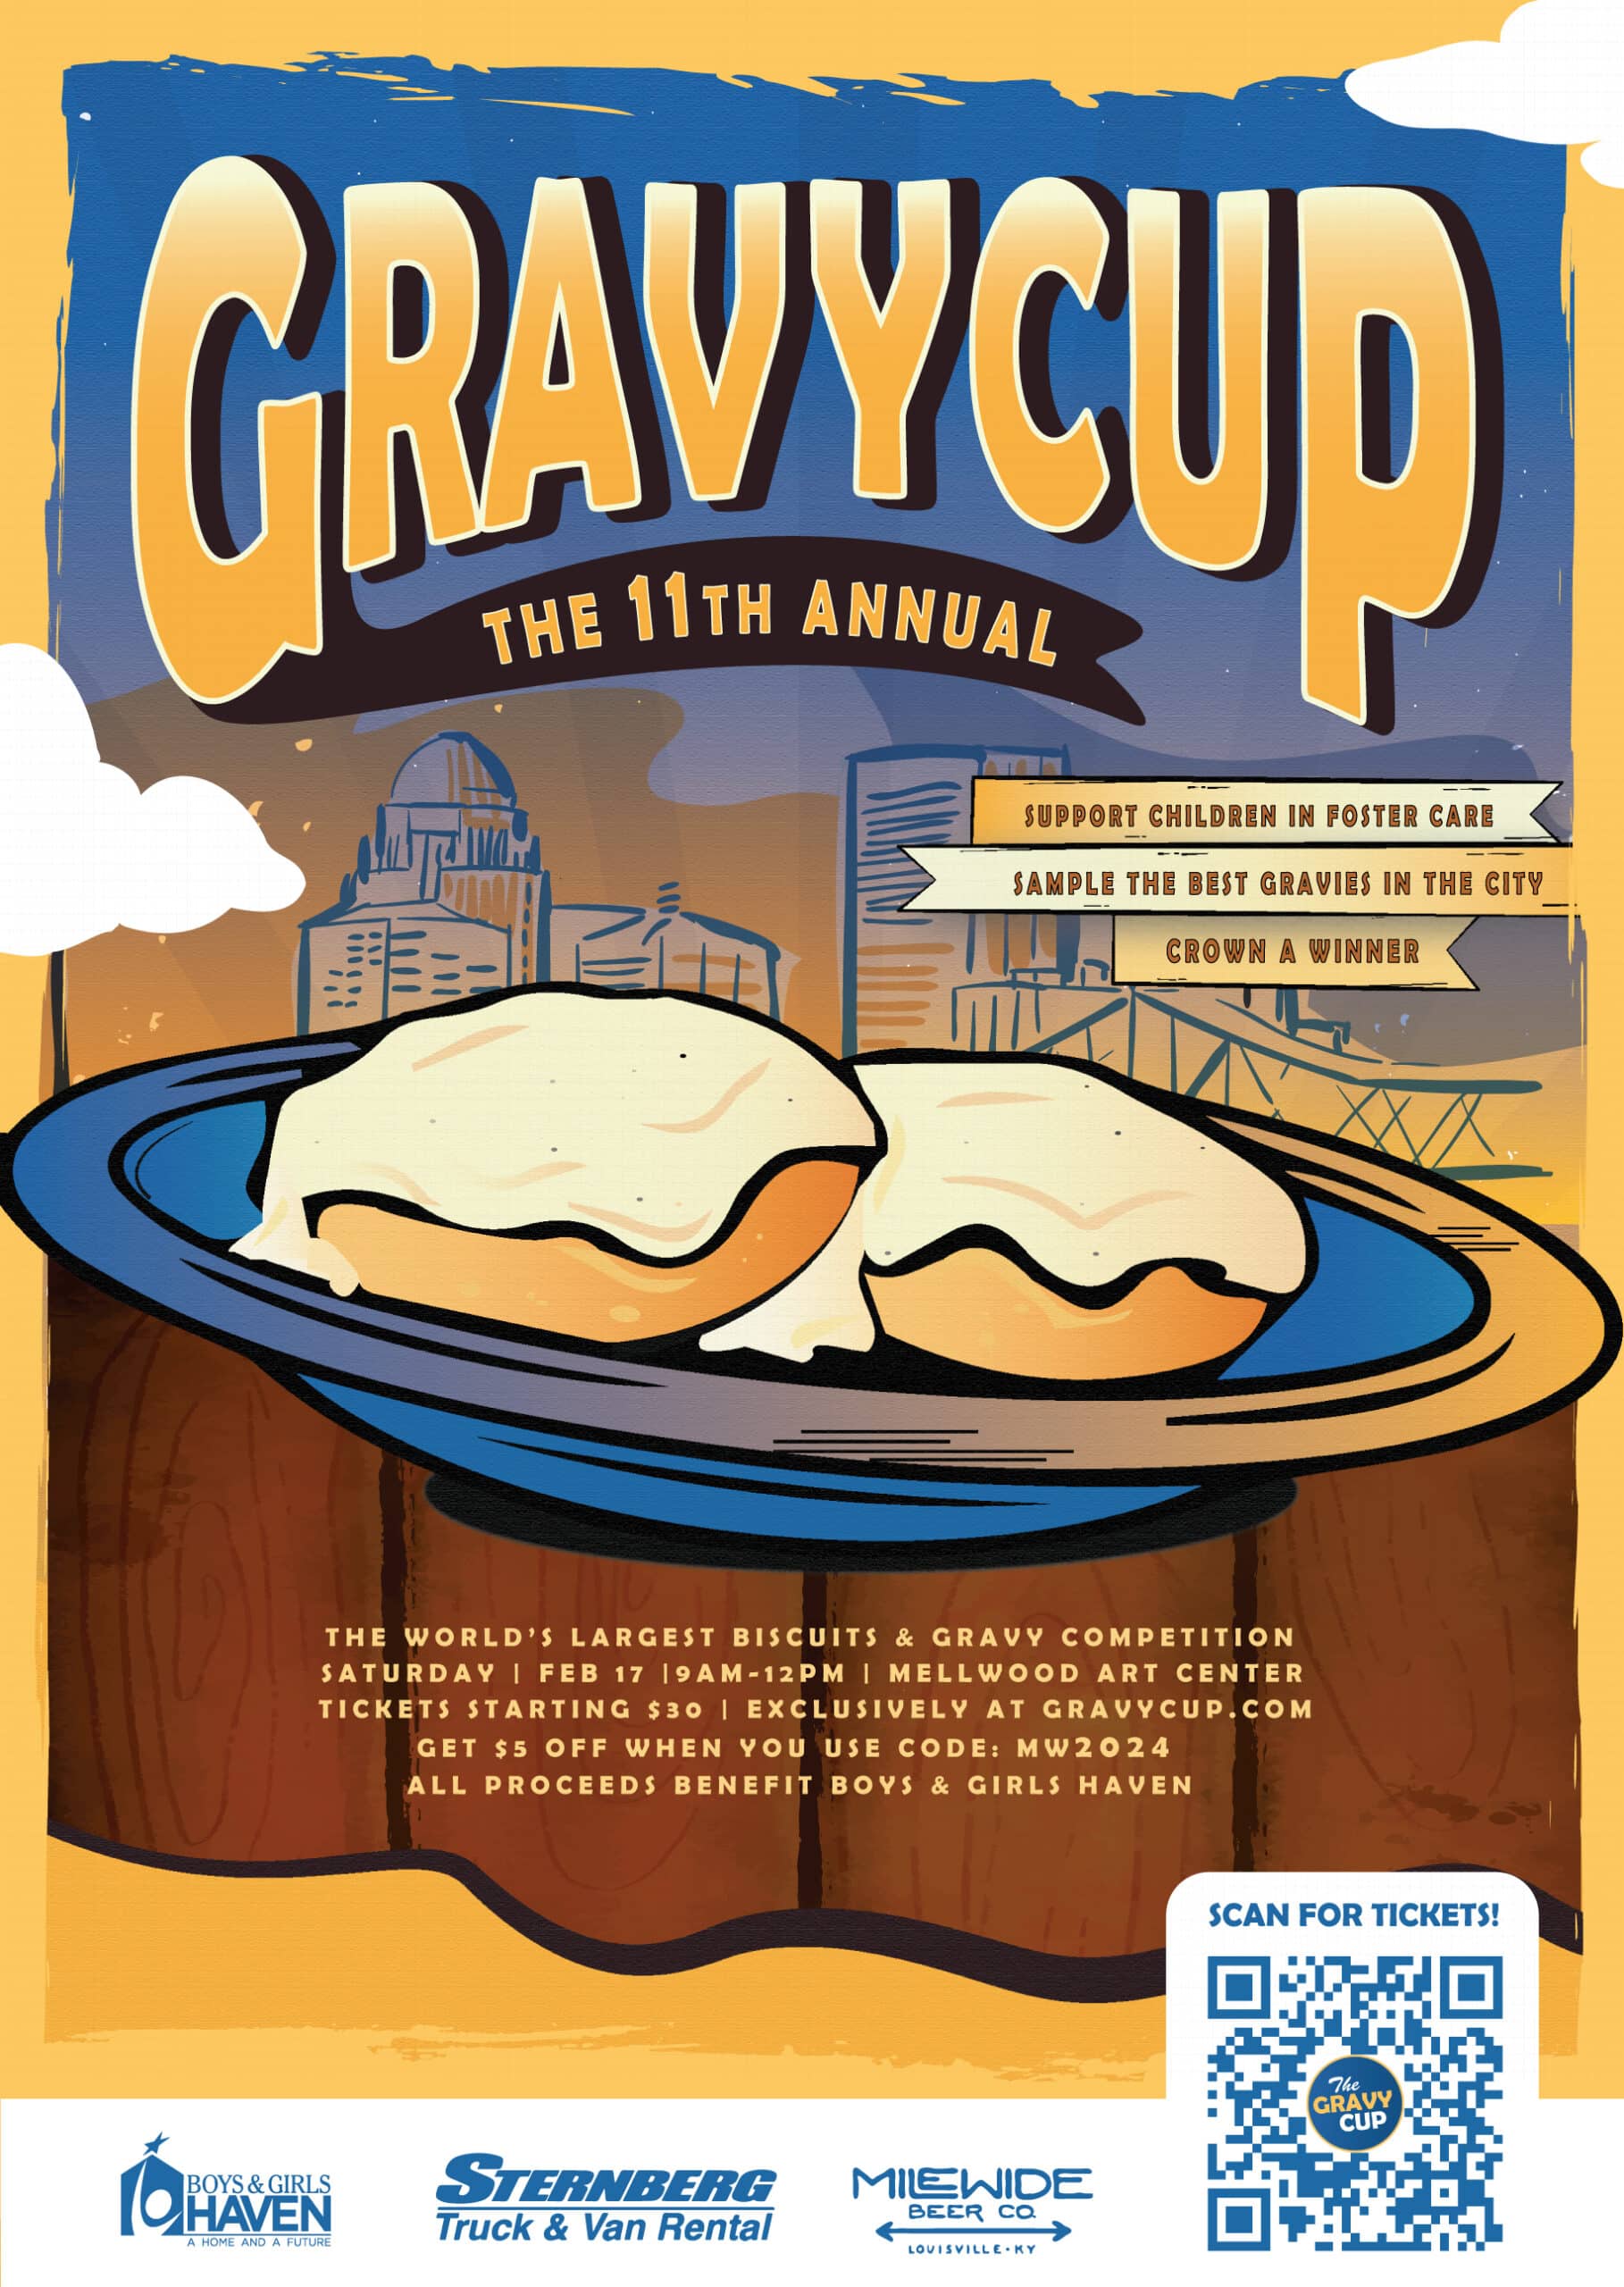 The Gravy Cup  Louisville KY